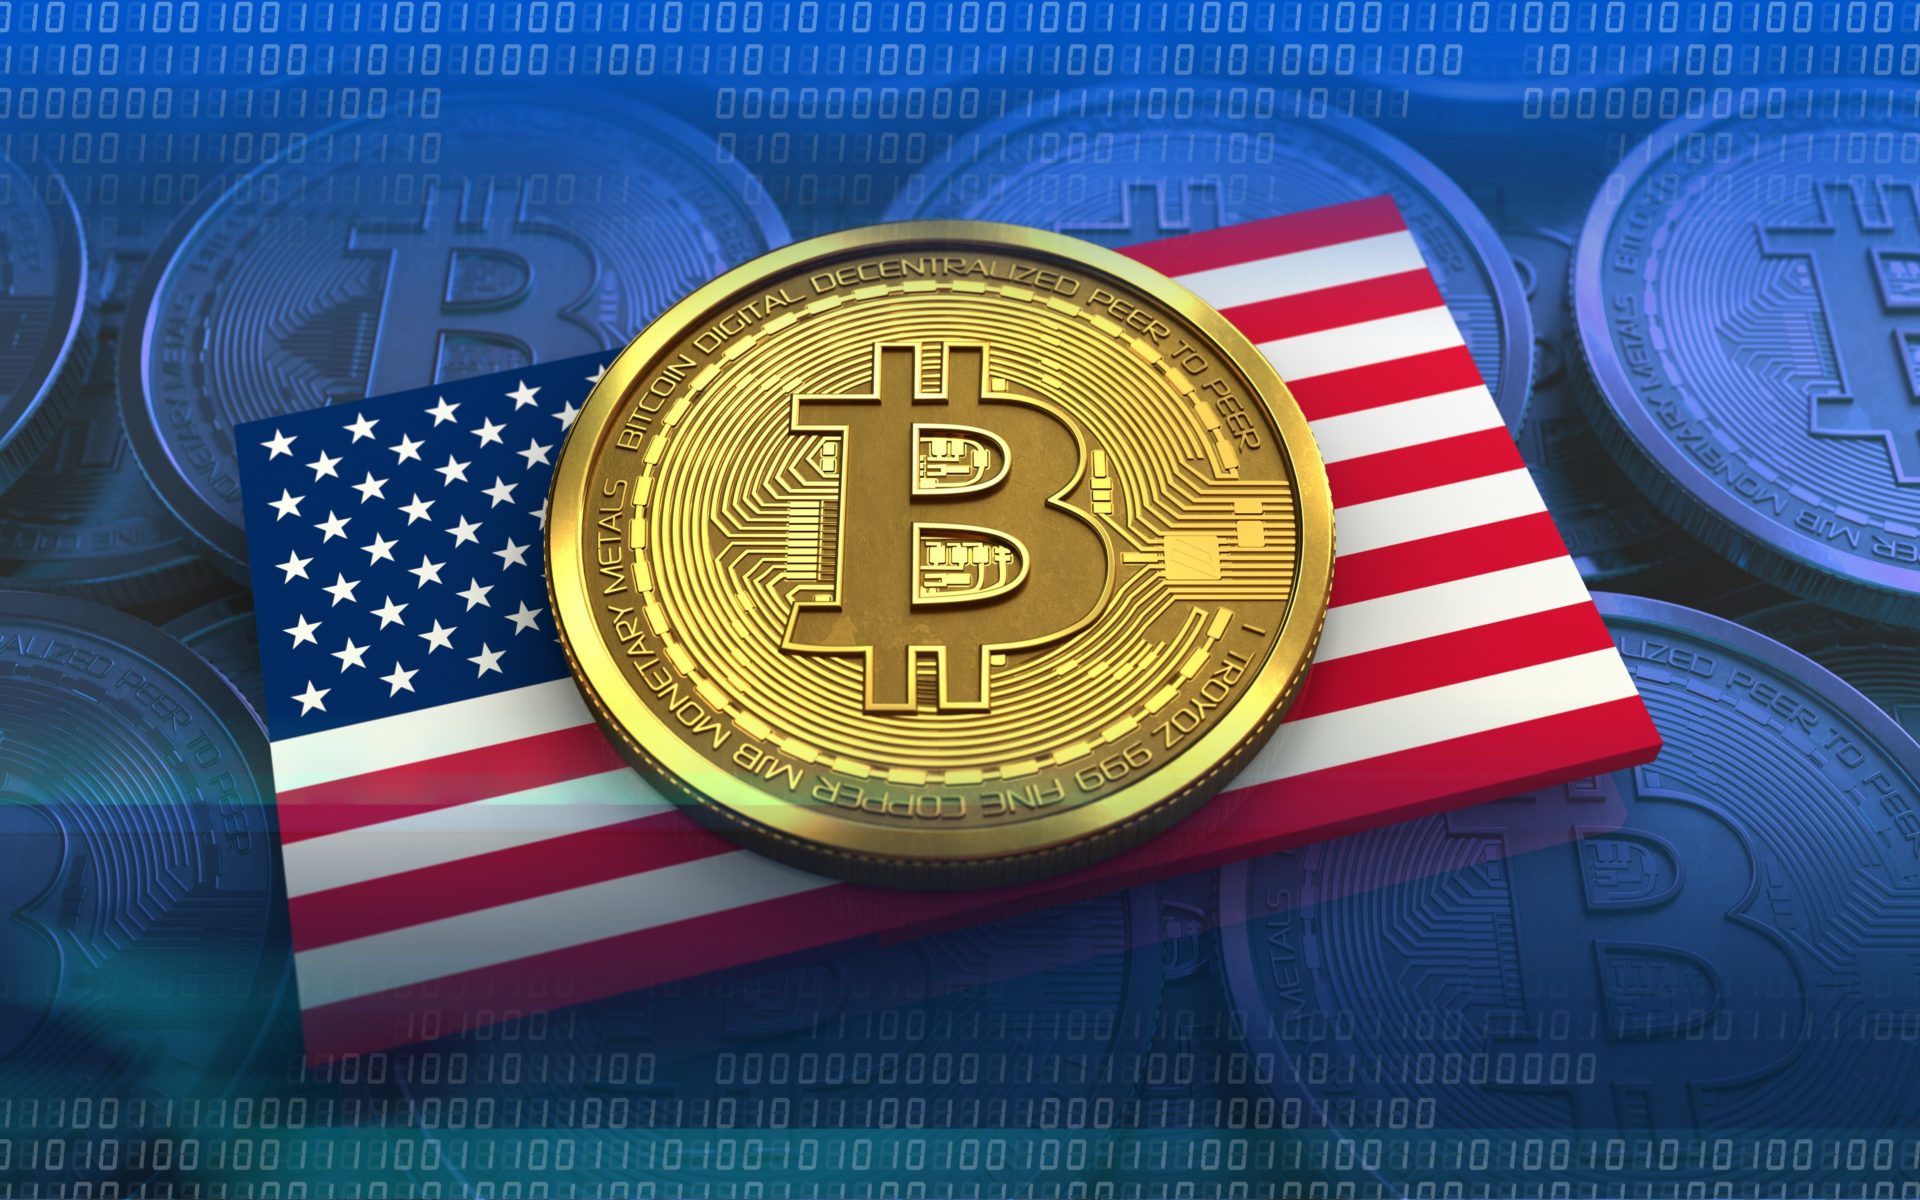 America is bankrupt and it suits Bitcoin